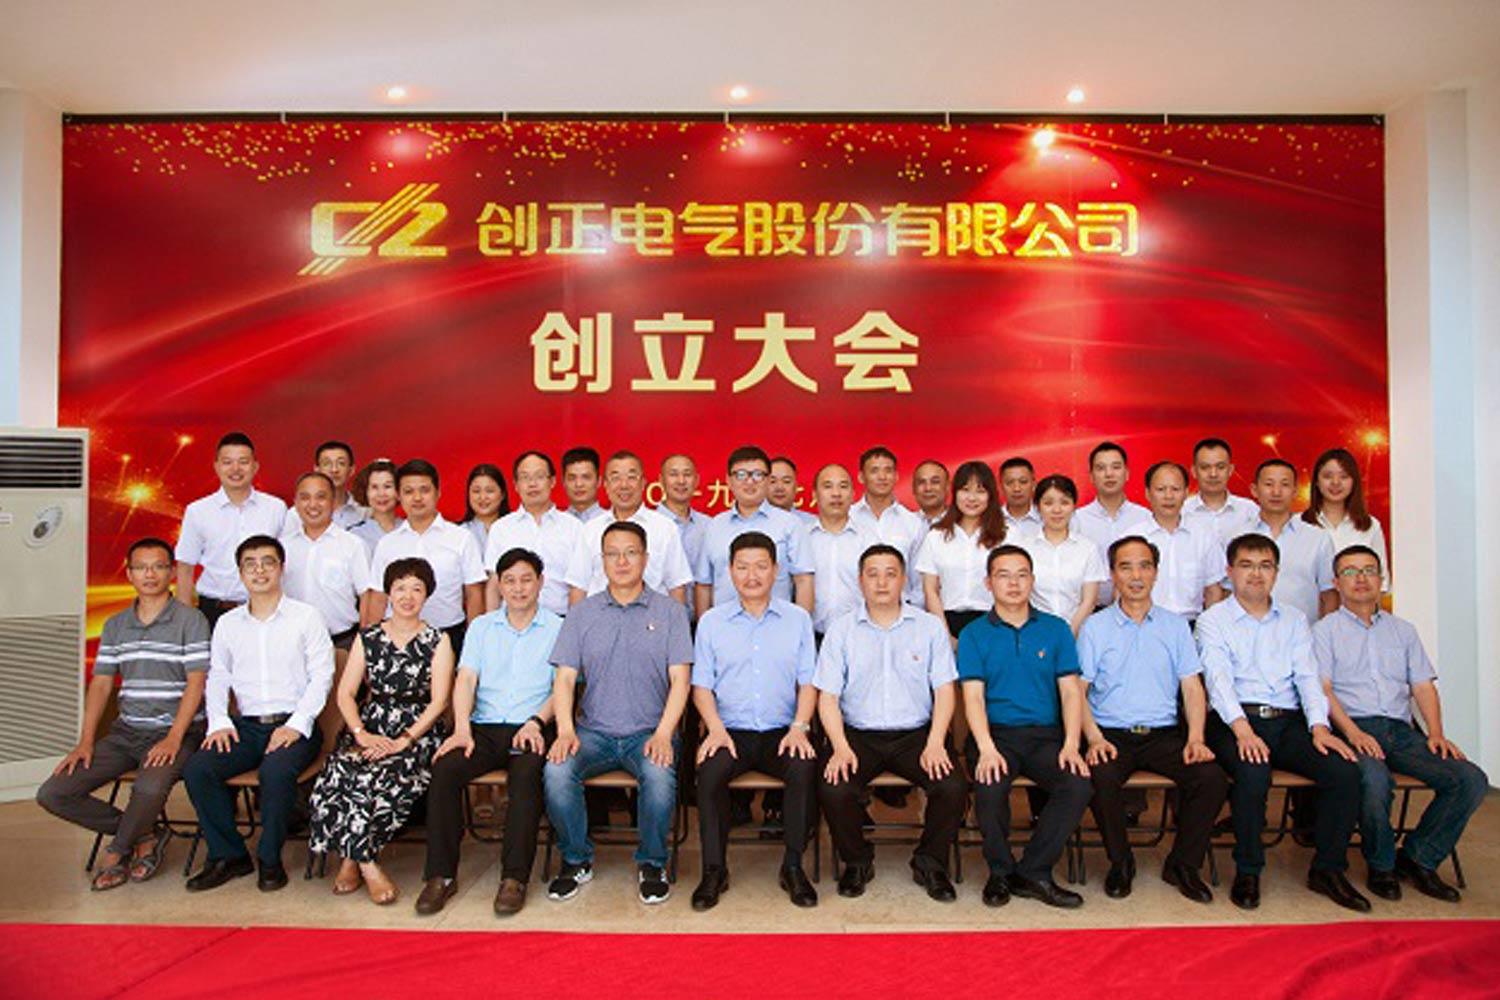 The founding meeting of Chuangzheng Electric Co., Ltd. was successfully held